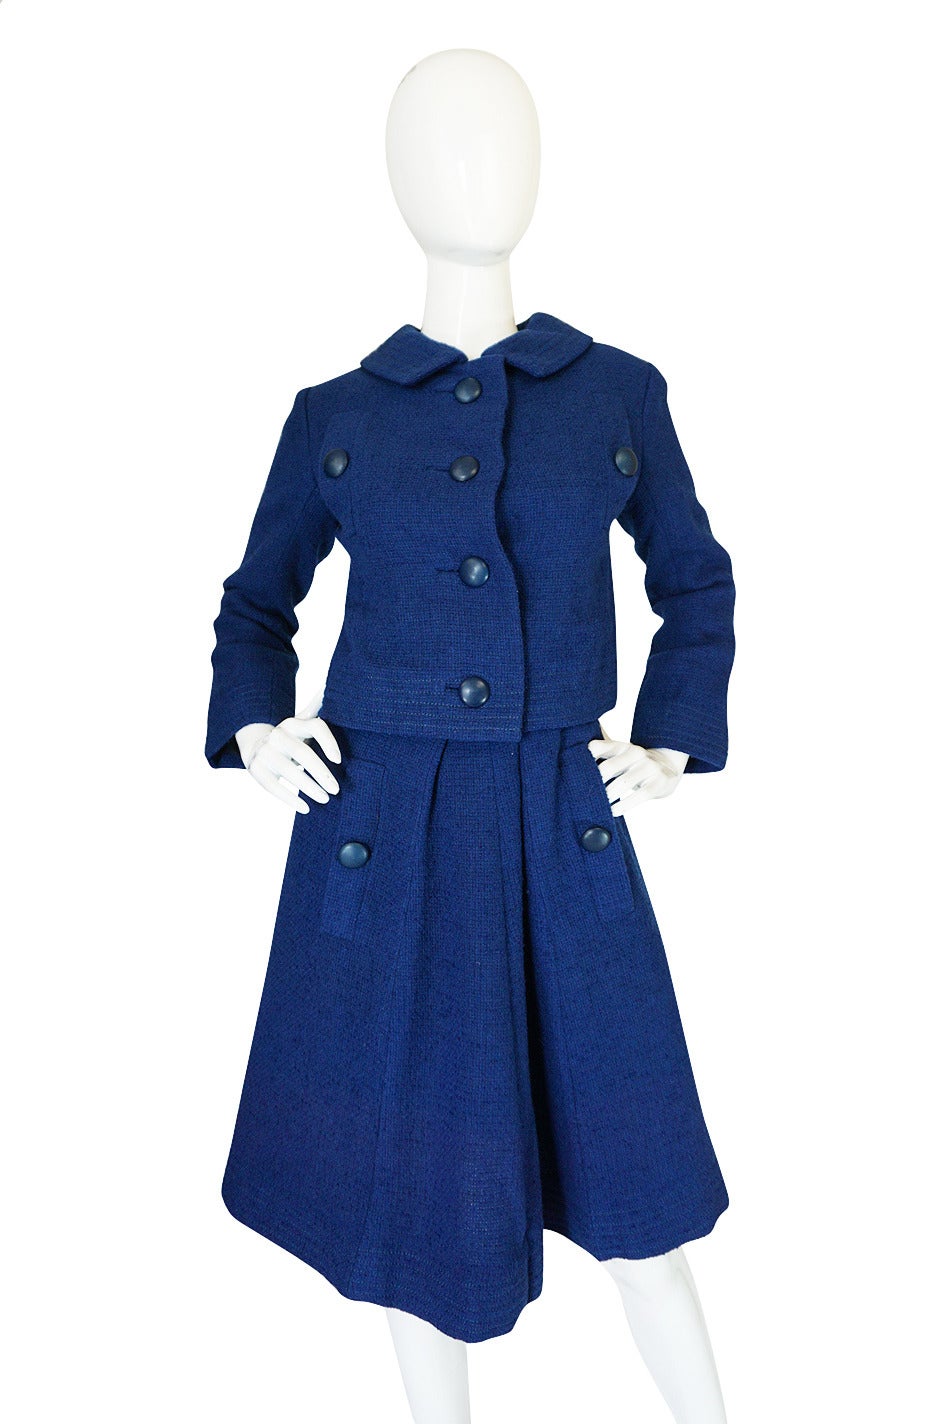 1950s Rare Christian Dior for Japan Blue Suit at 1stdibs